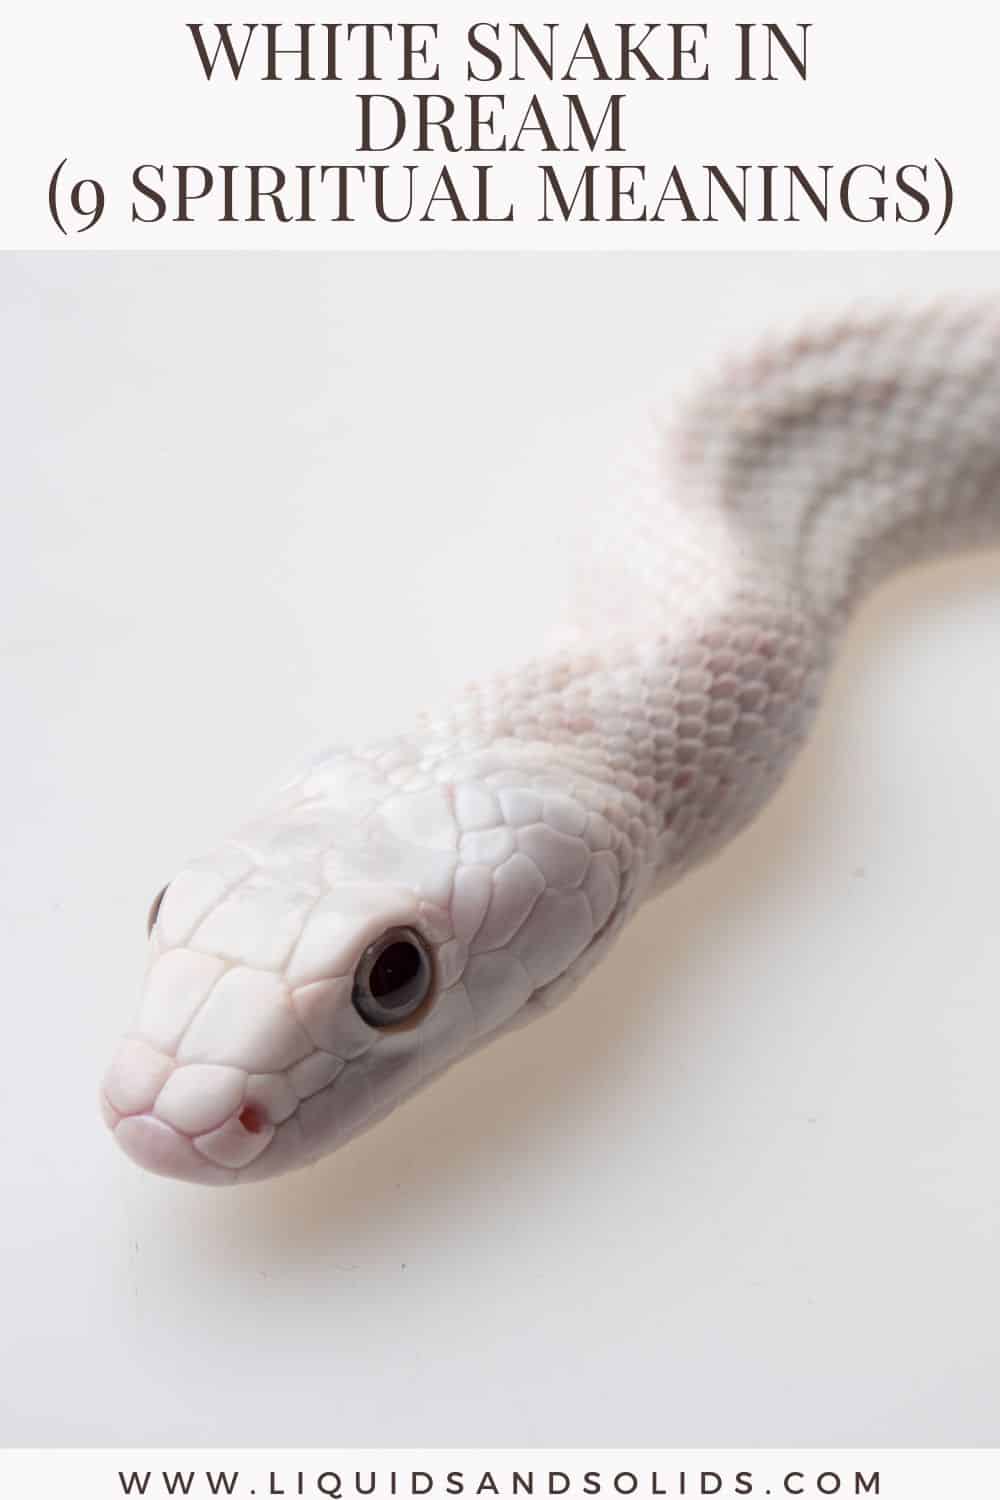 What’s the meaning of seeing a white snake in a dream